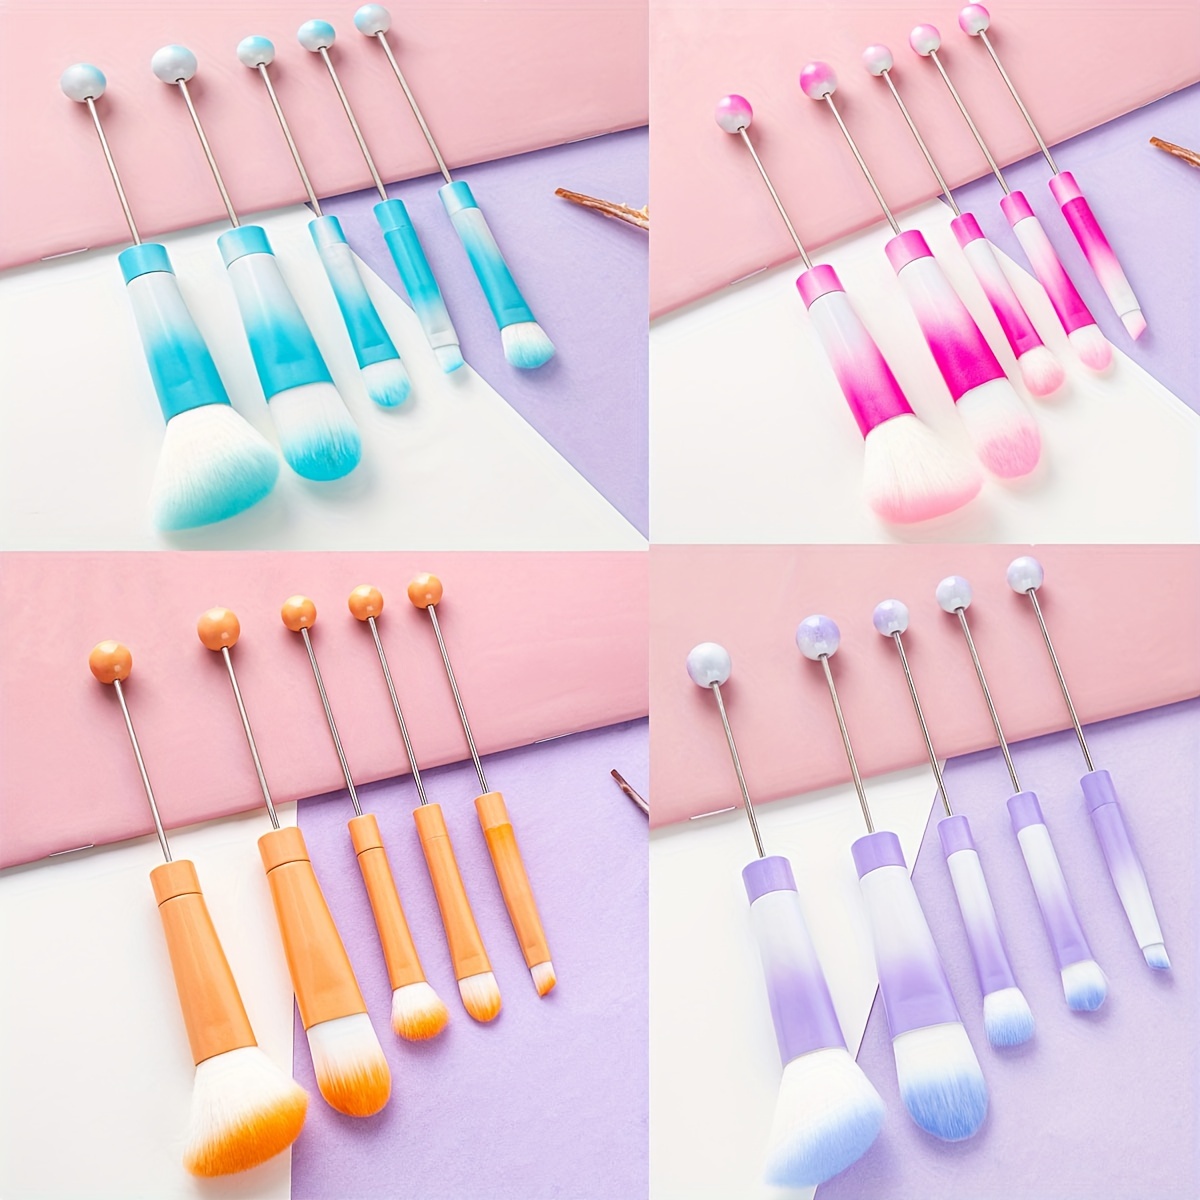 

5-piece Gradient Beaded Makeup Brush Set - Nylon Bristles For All Skin Types, Metal Handle, Fragrance-free - Ideal For Beginners & Travel